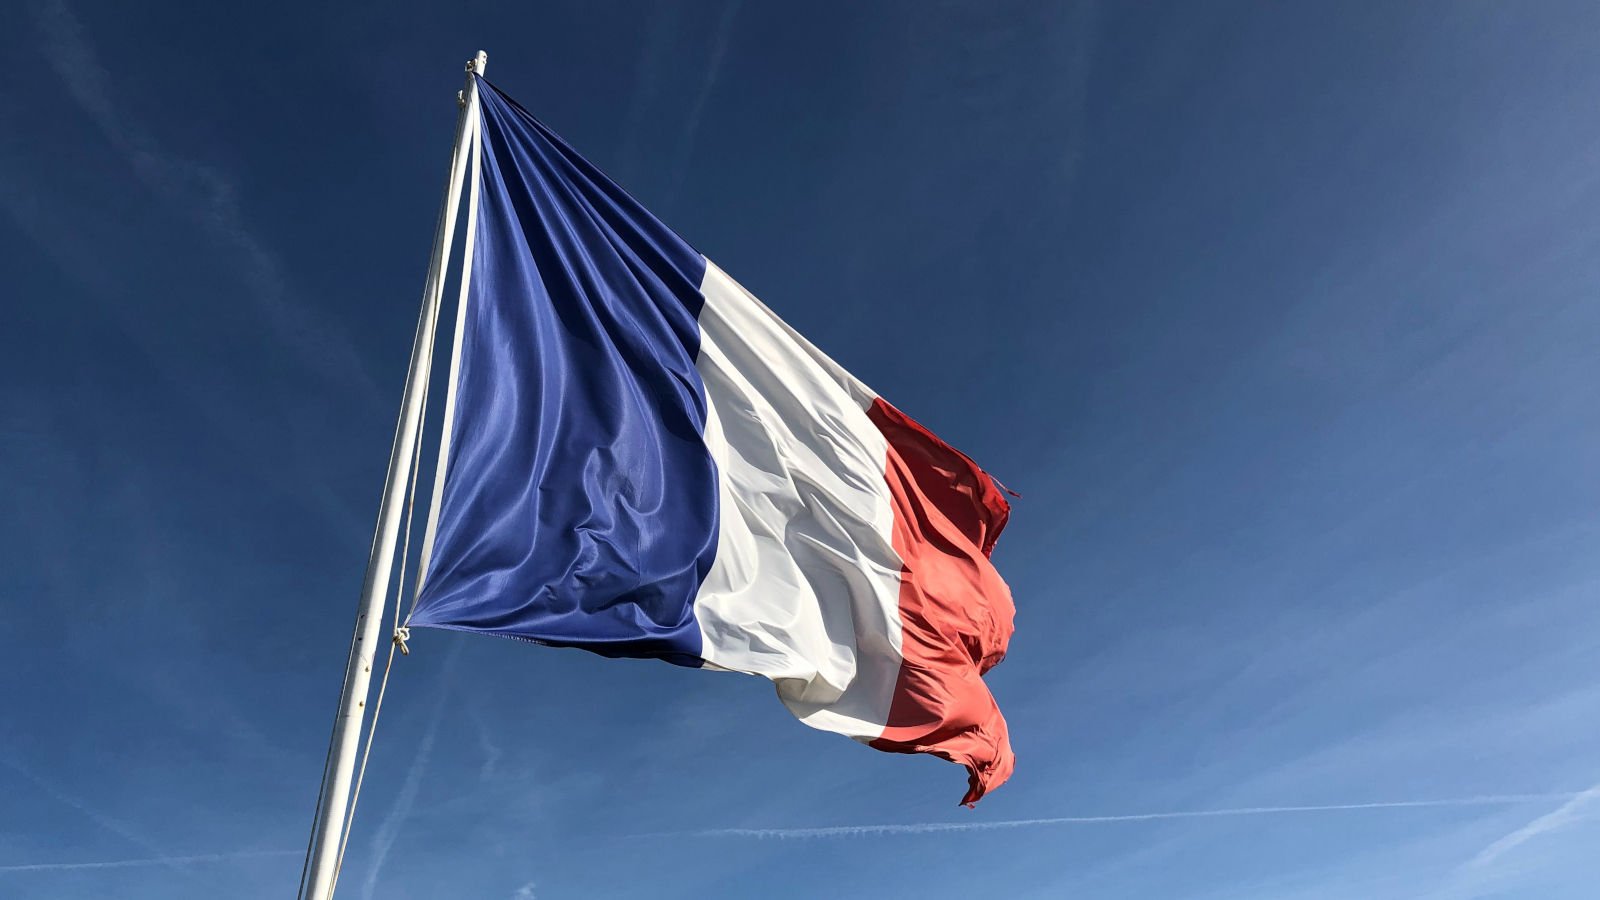 Data breach at French govt agency exposes info of 10 million people